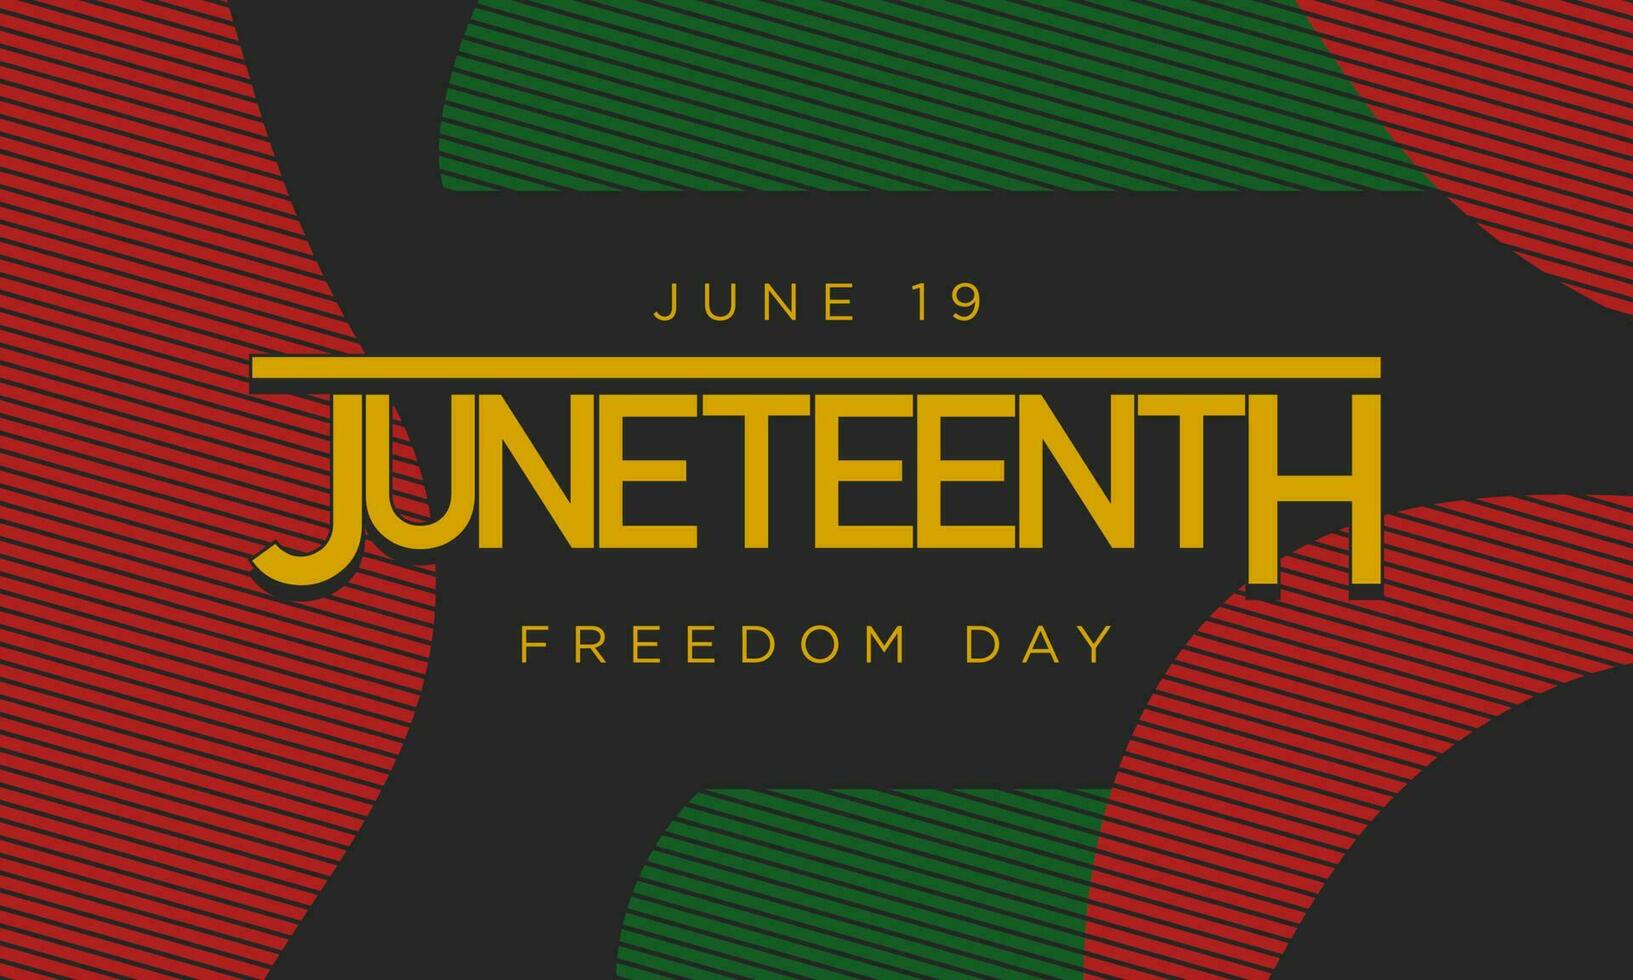 Juneteenth Freedom Day Background Design. vector